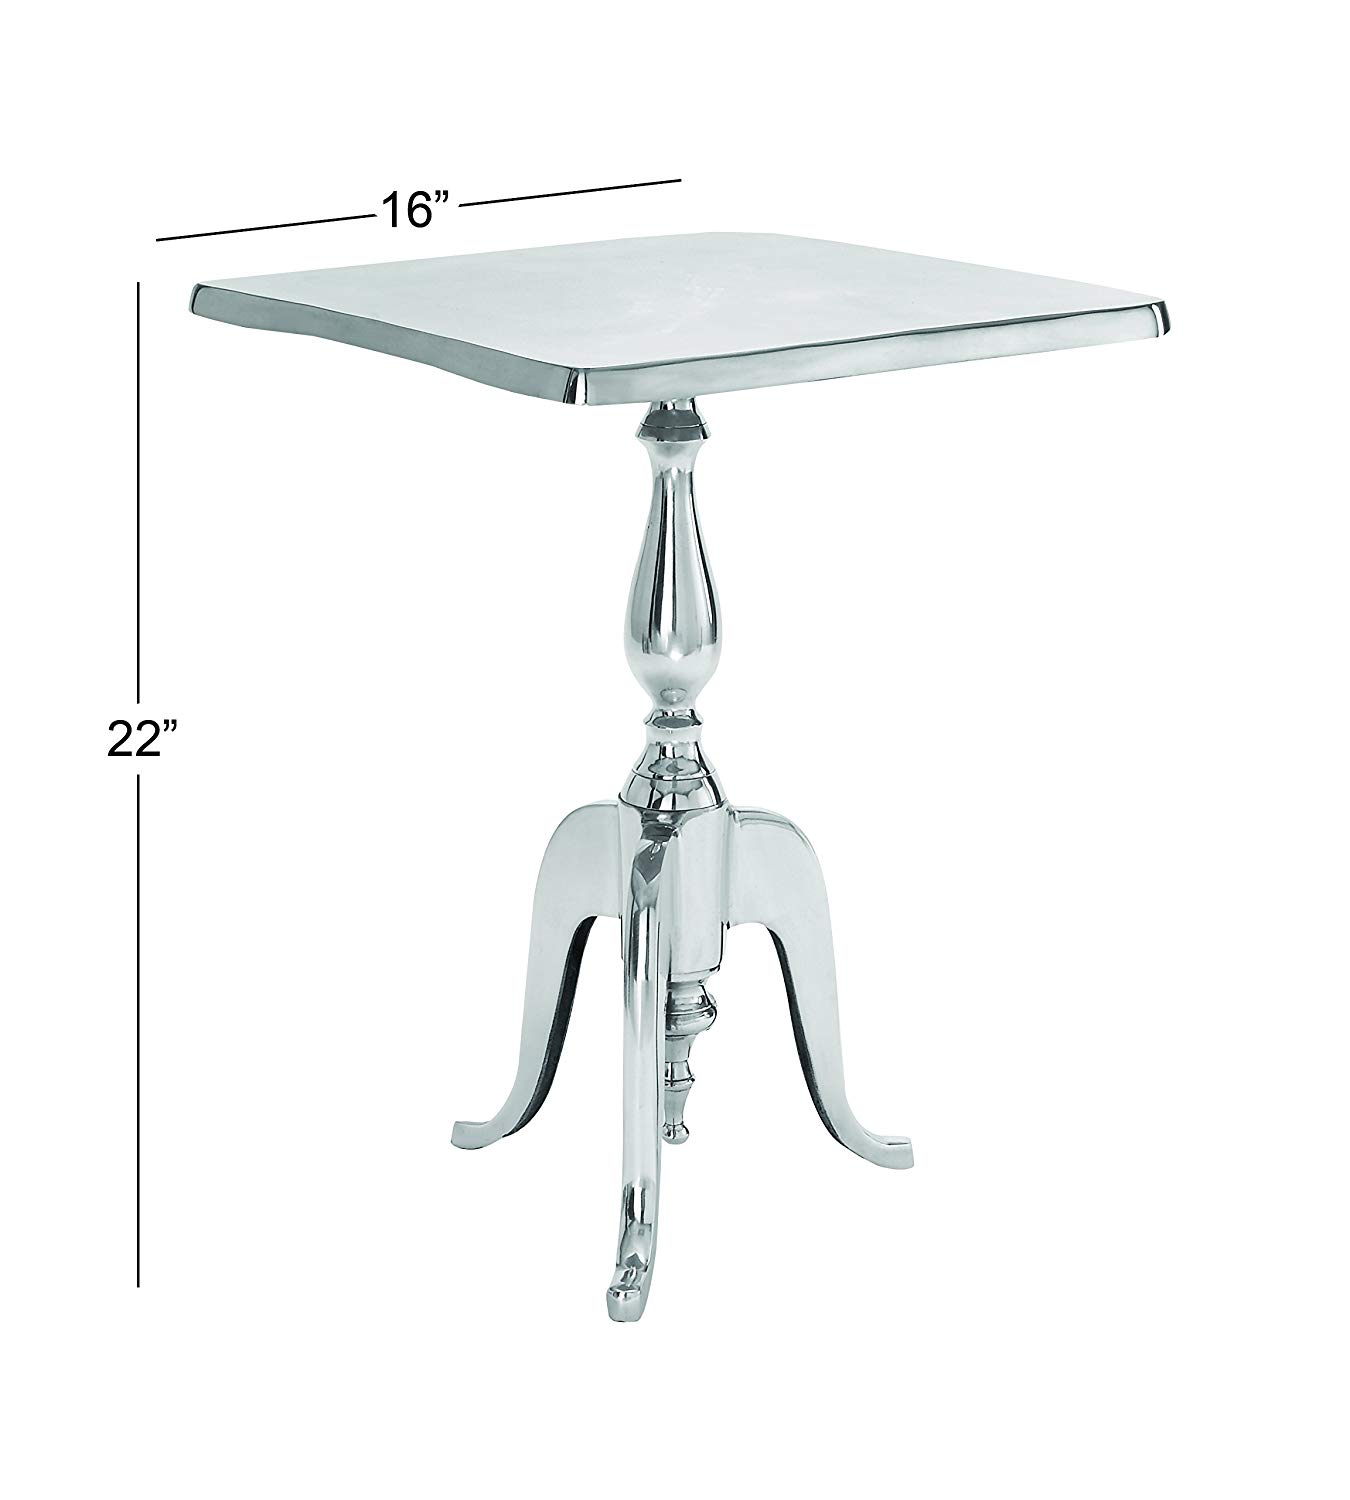 deco aluminum square accent table inch small kitchen dining extendable farmhouse prong hairpin legs metal side industrial coffee target fretwork marble bar free topper patterns